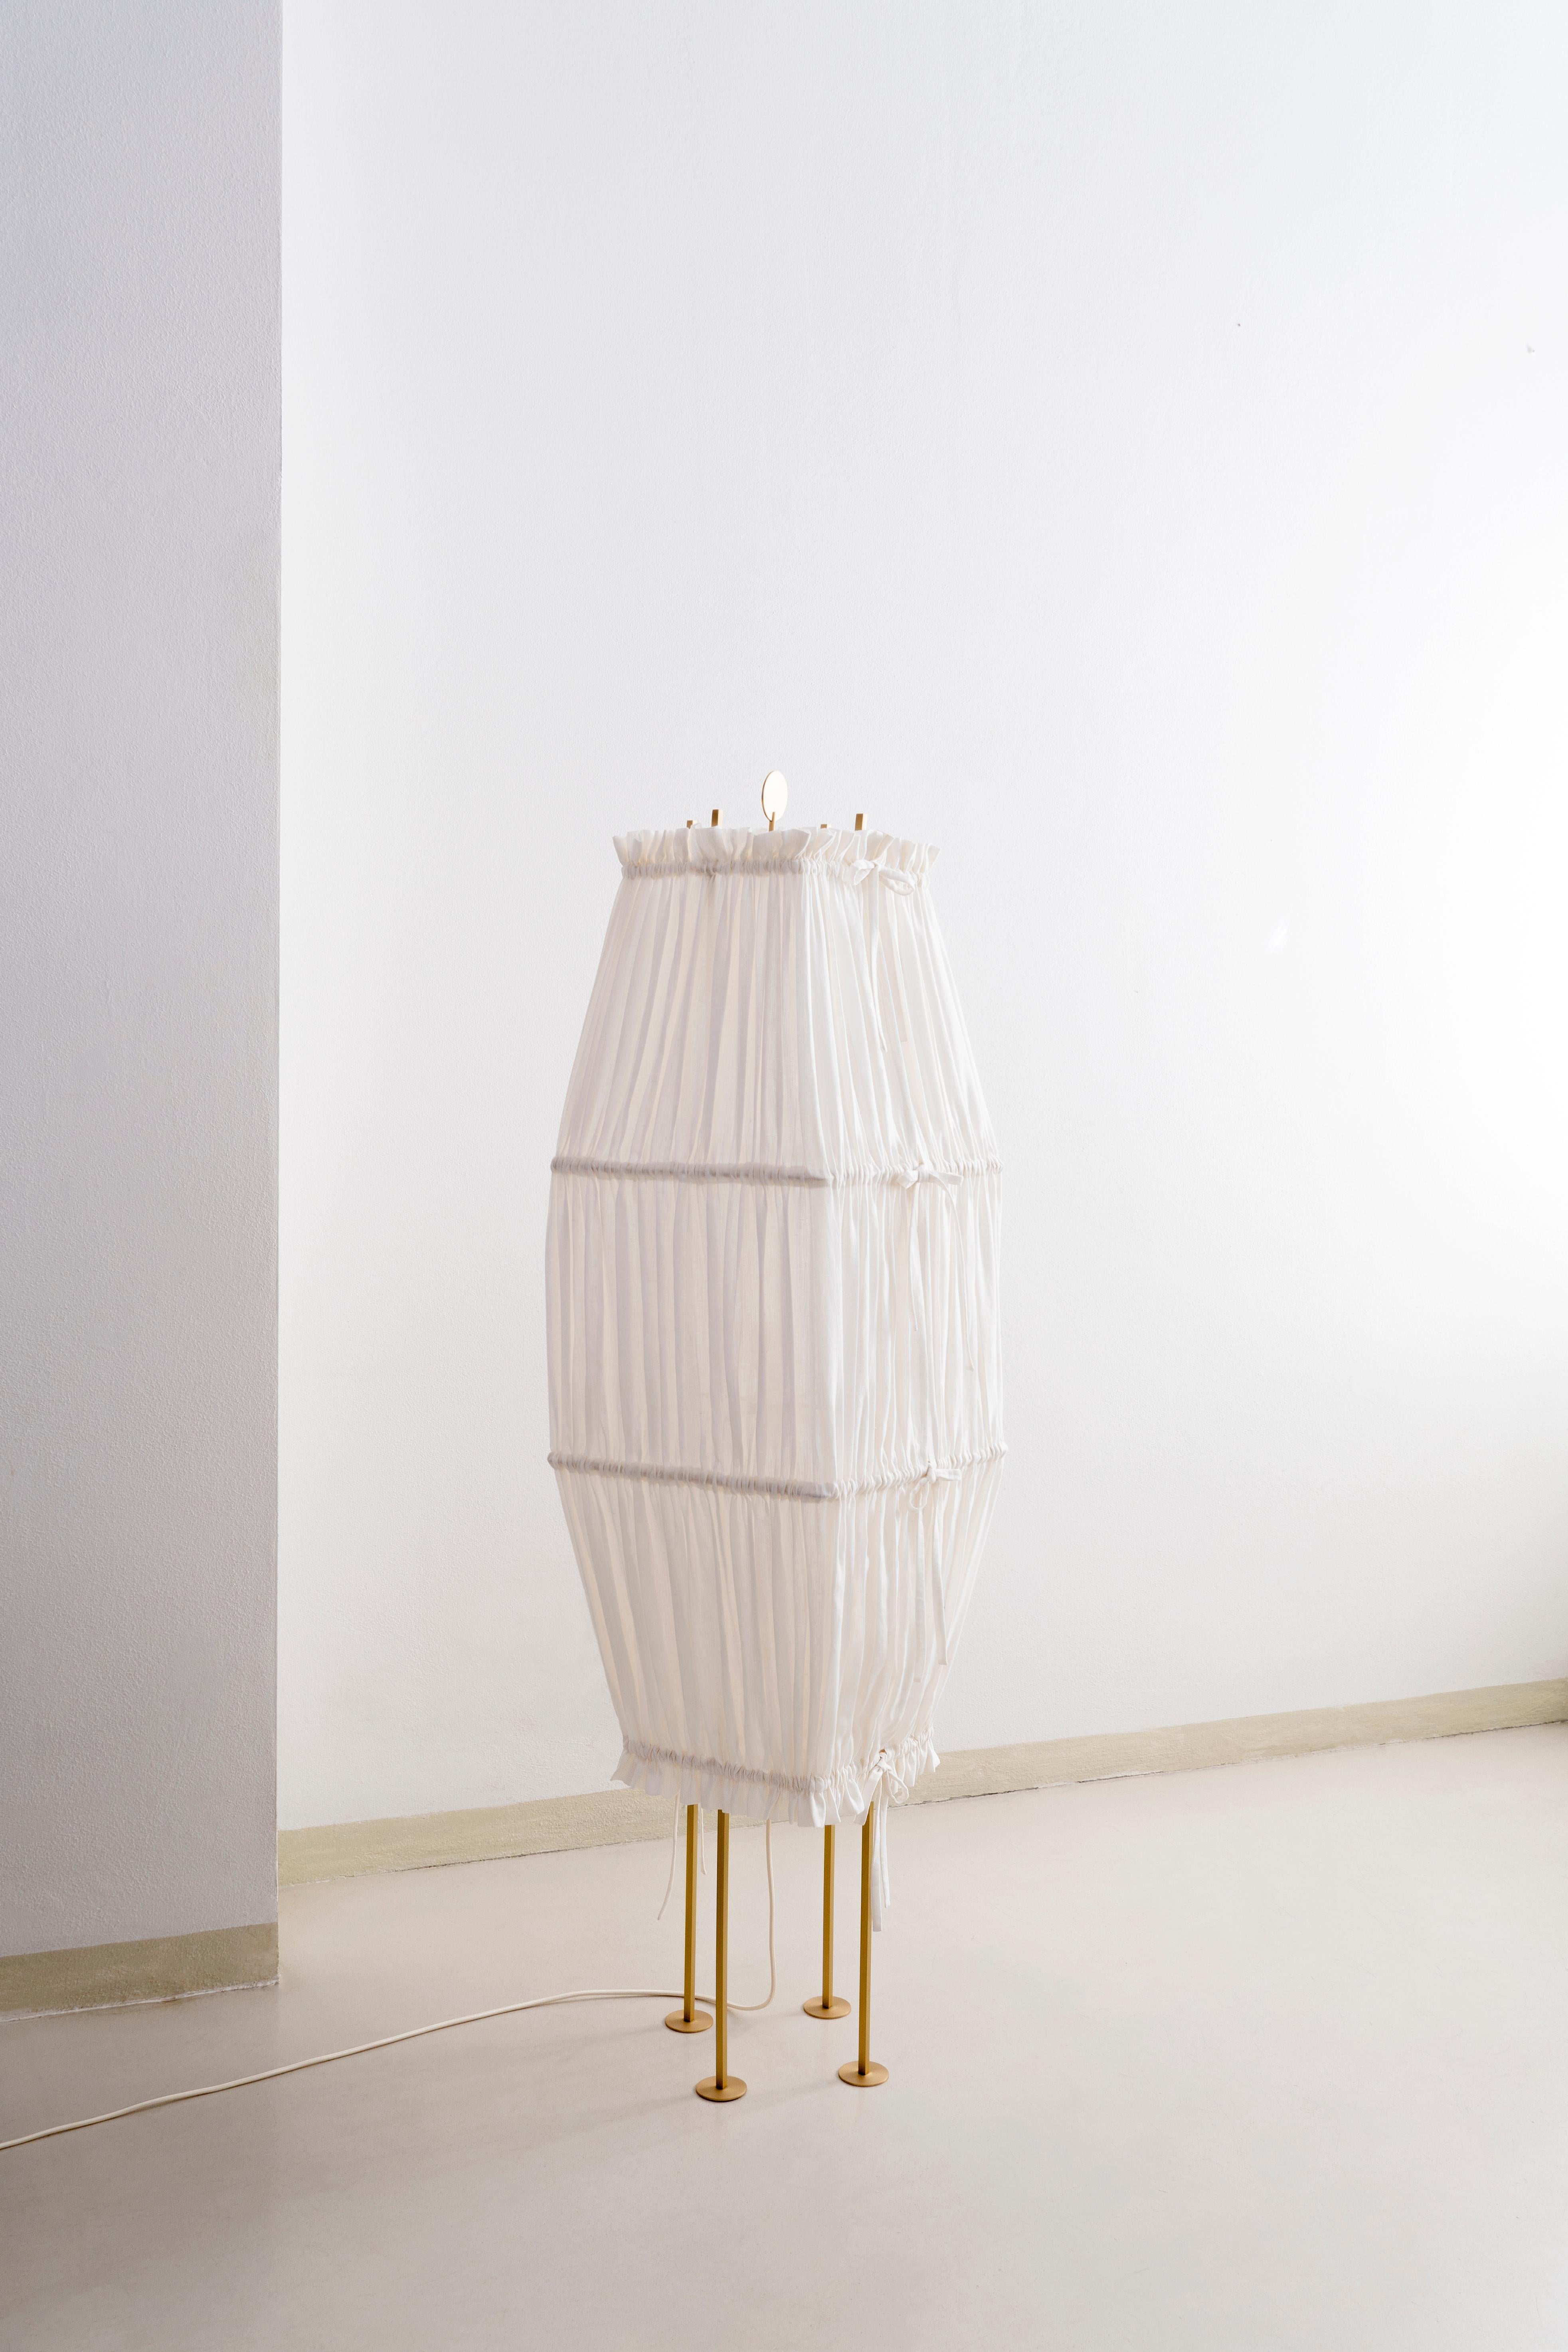 Large presenza floor lamp by Agustina Bottoni.
Materials: hemp fabric (GOTS organic certification), satin-finish solid brass, LED lighting.
Dimensions: W 42 x D 42 x H 150 cm.
Also available in medium size. 

presenza
A pair of sculptural